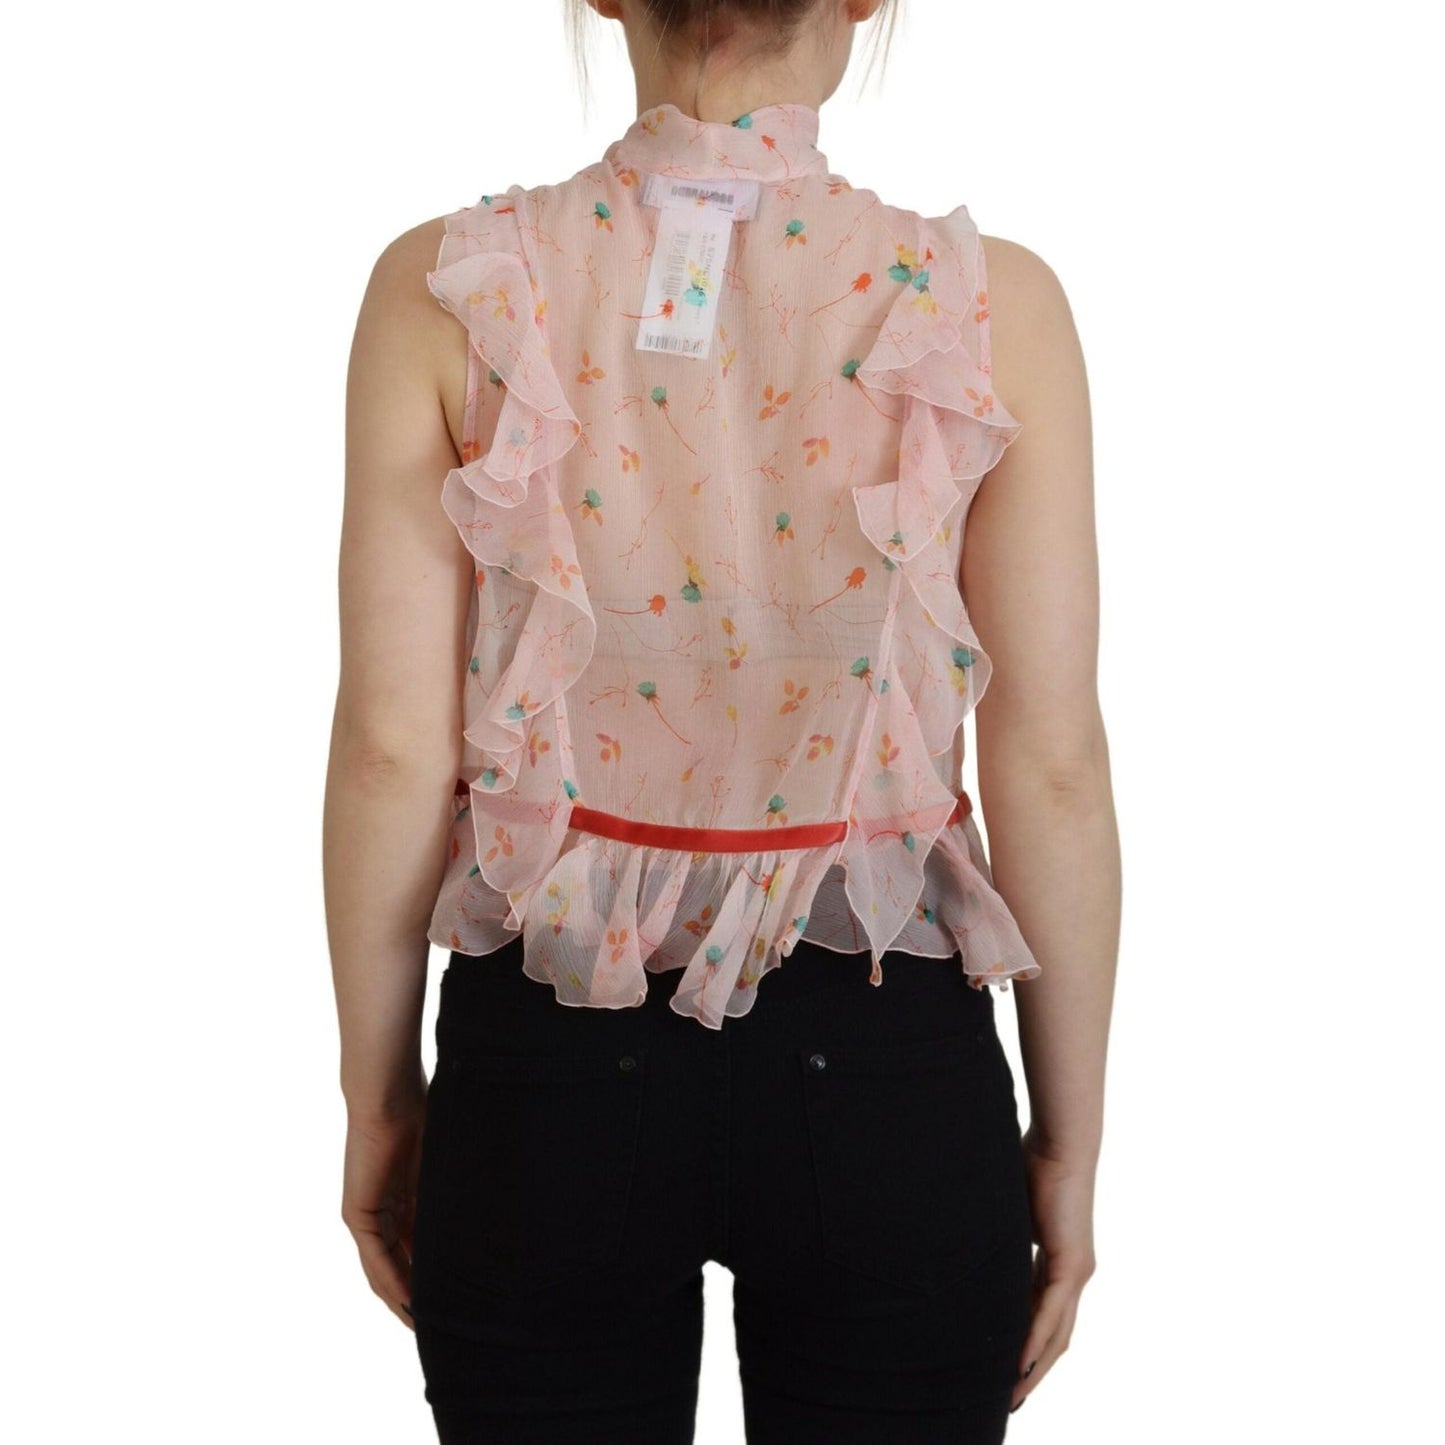 Dsquared² Pink Floral Print Silk Sleeveless Ascot Collar Top pink-floral-print-silk-sleeveless-ascot-collar-top